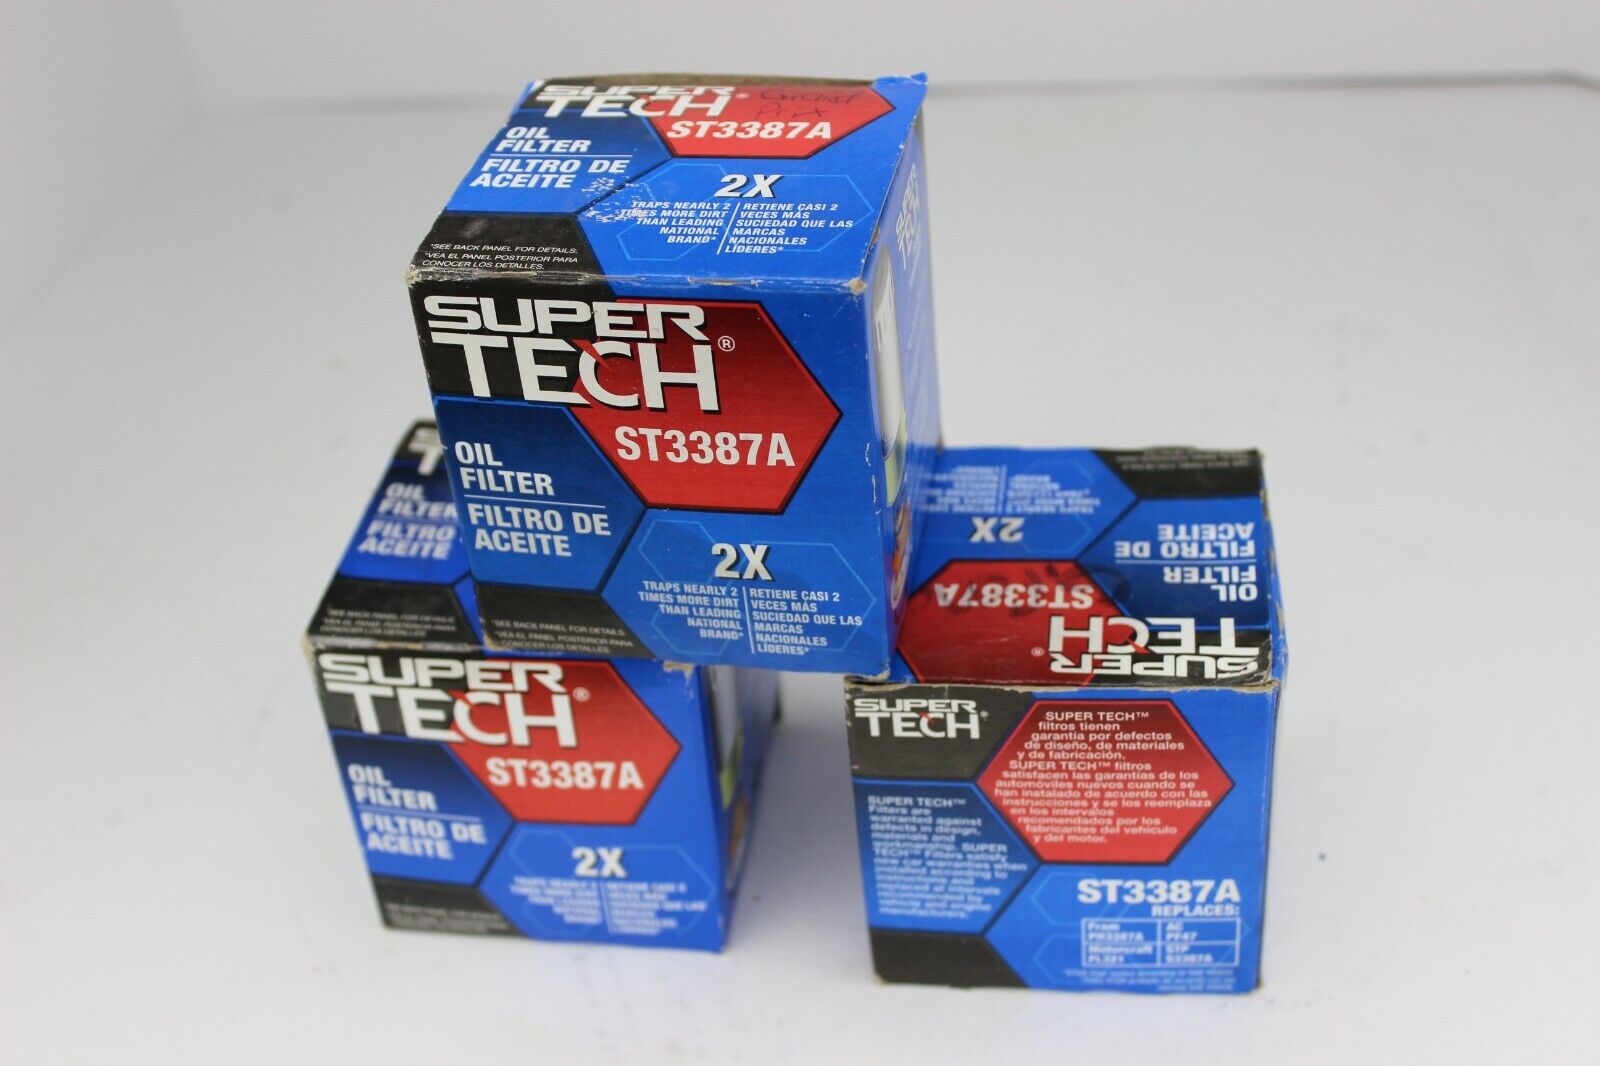 SuperTech ST3387A Oil Filter Lot of 3 Made in USA 